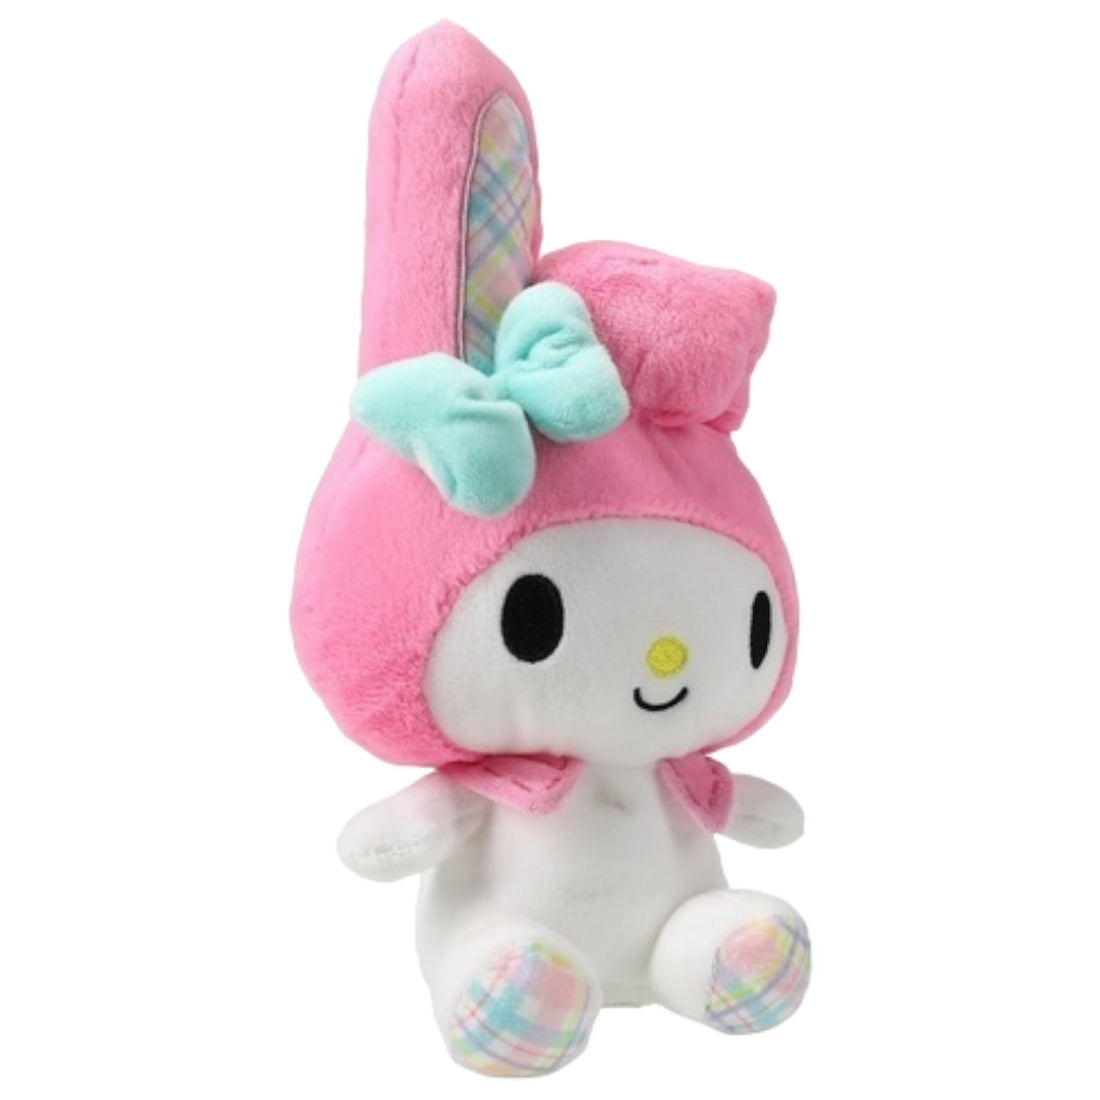 My Melody Easter Plush 11in